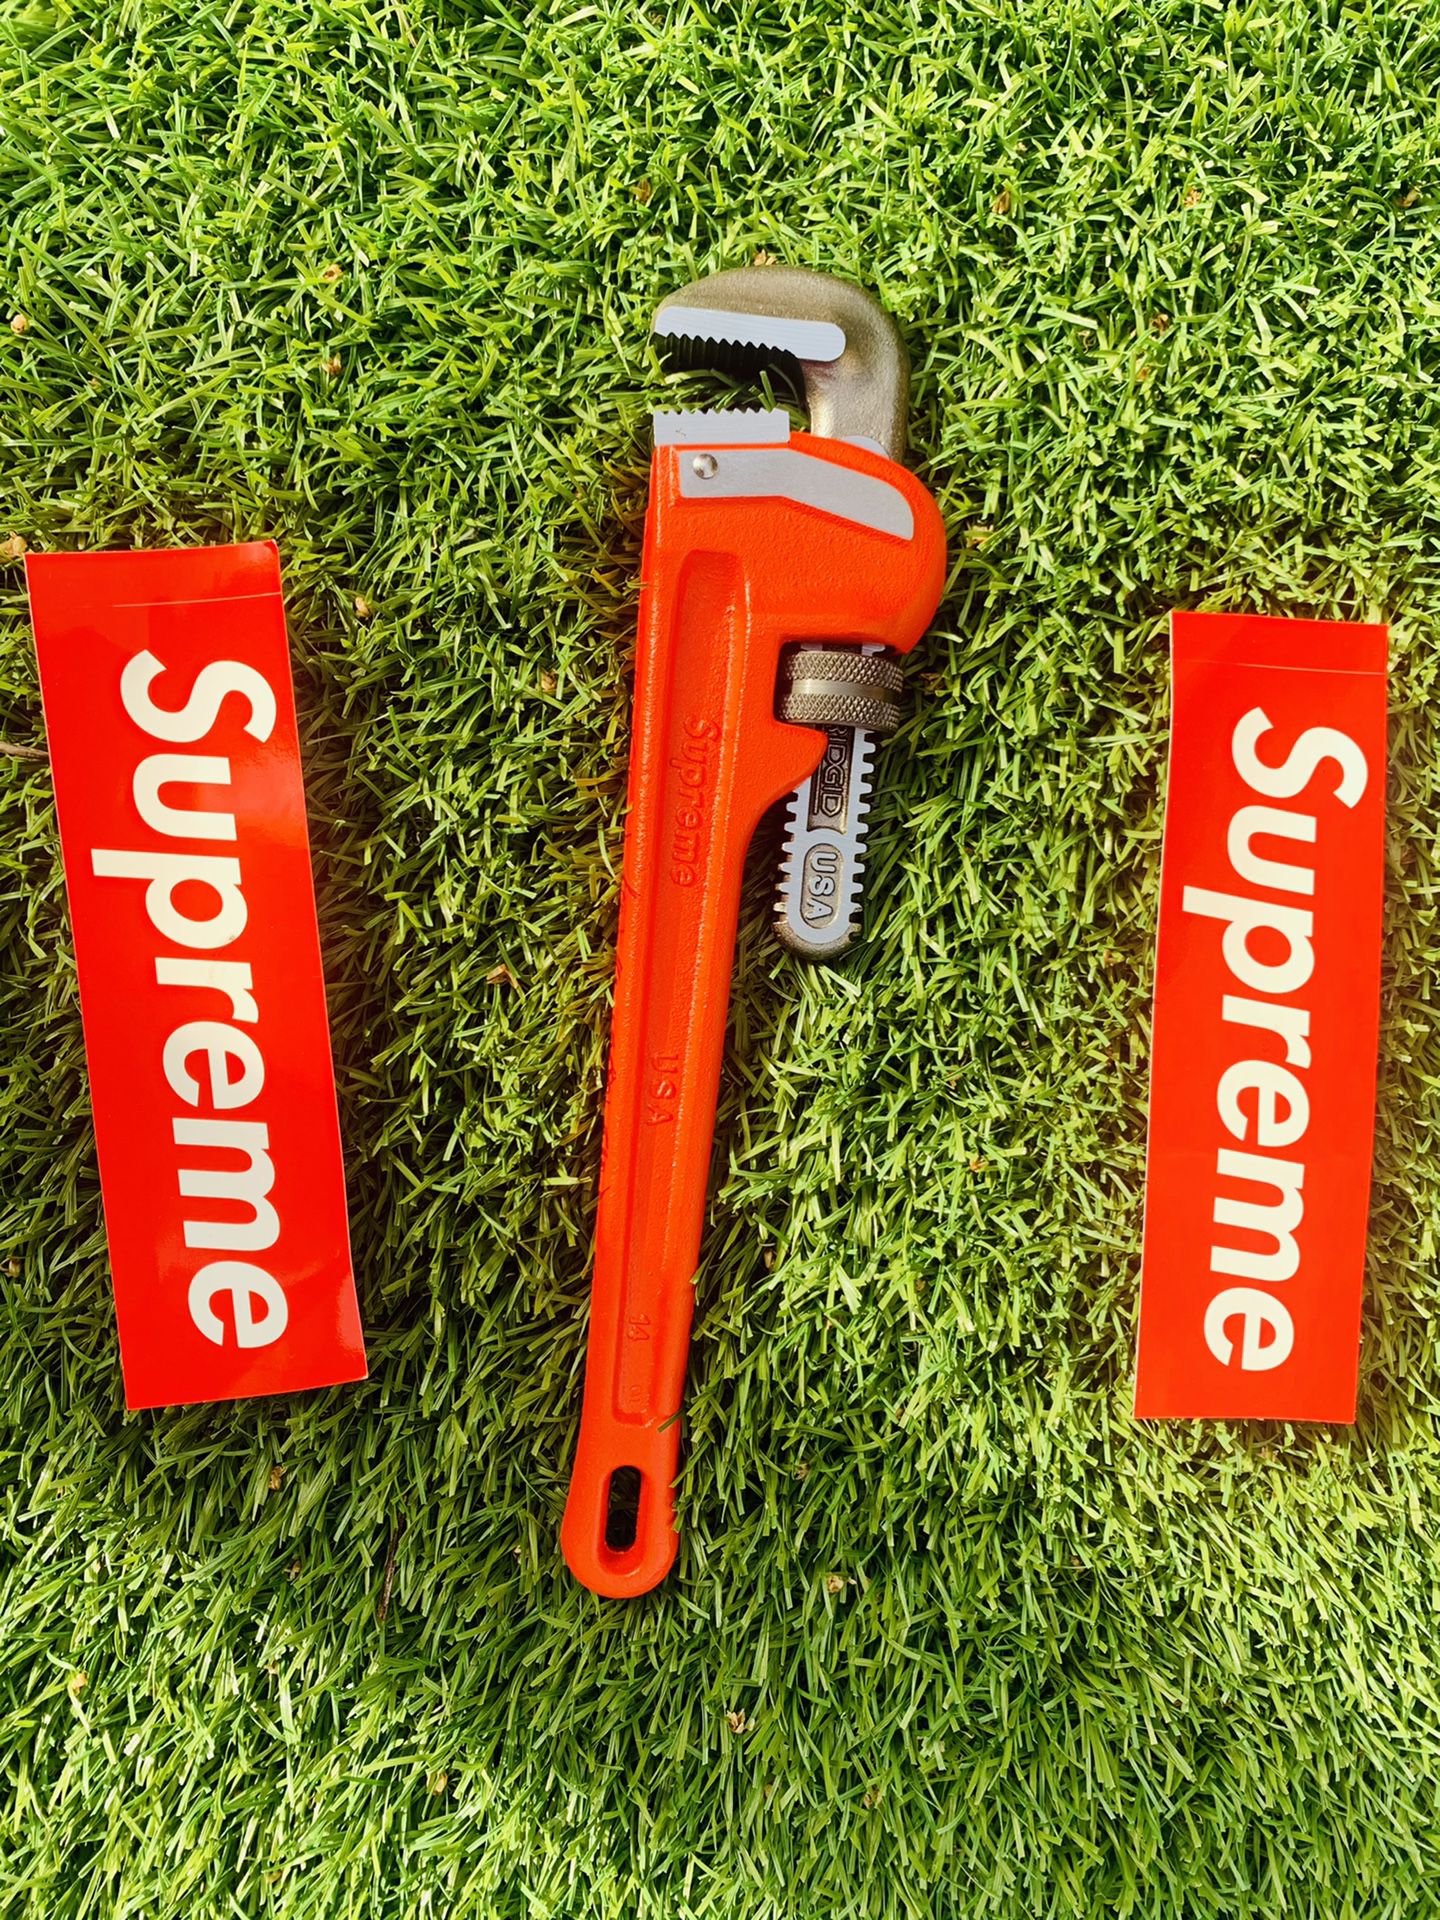 Supreme wrench